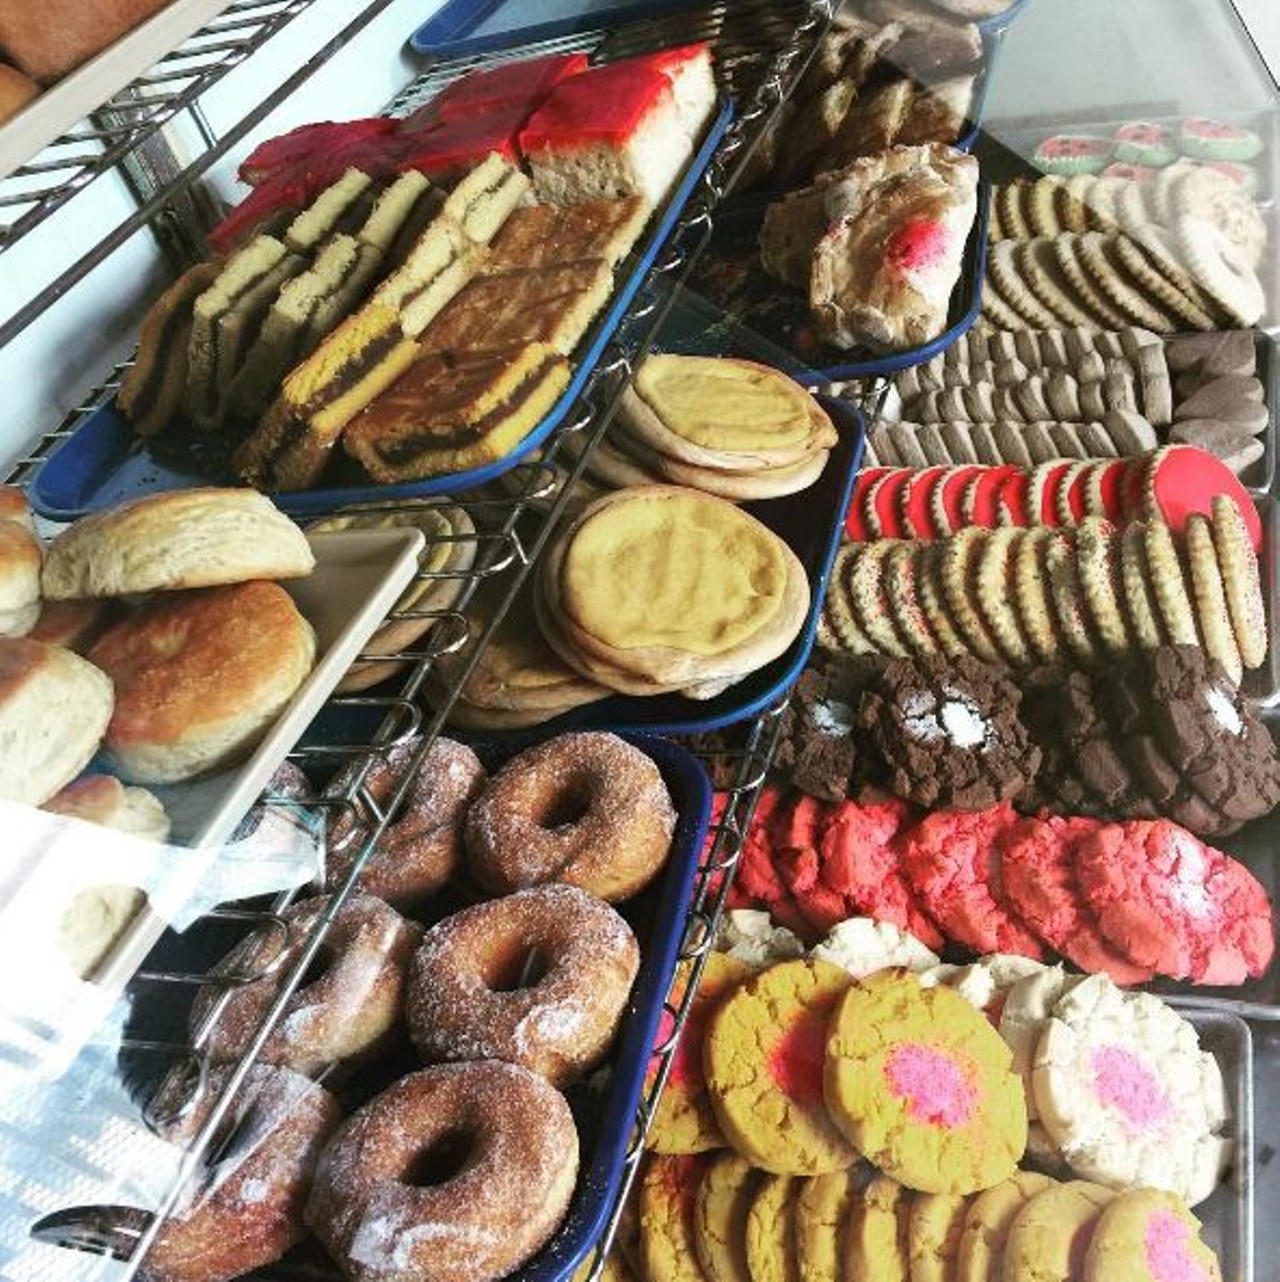 La Familia Bakery
2314 S. Flores St., (210) 320-6079
It's all in the name with this place, because what better place to treat your abuela to than La Familia?
Photo via Instagram, starwheel66